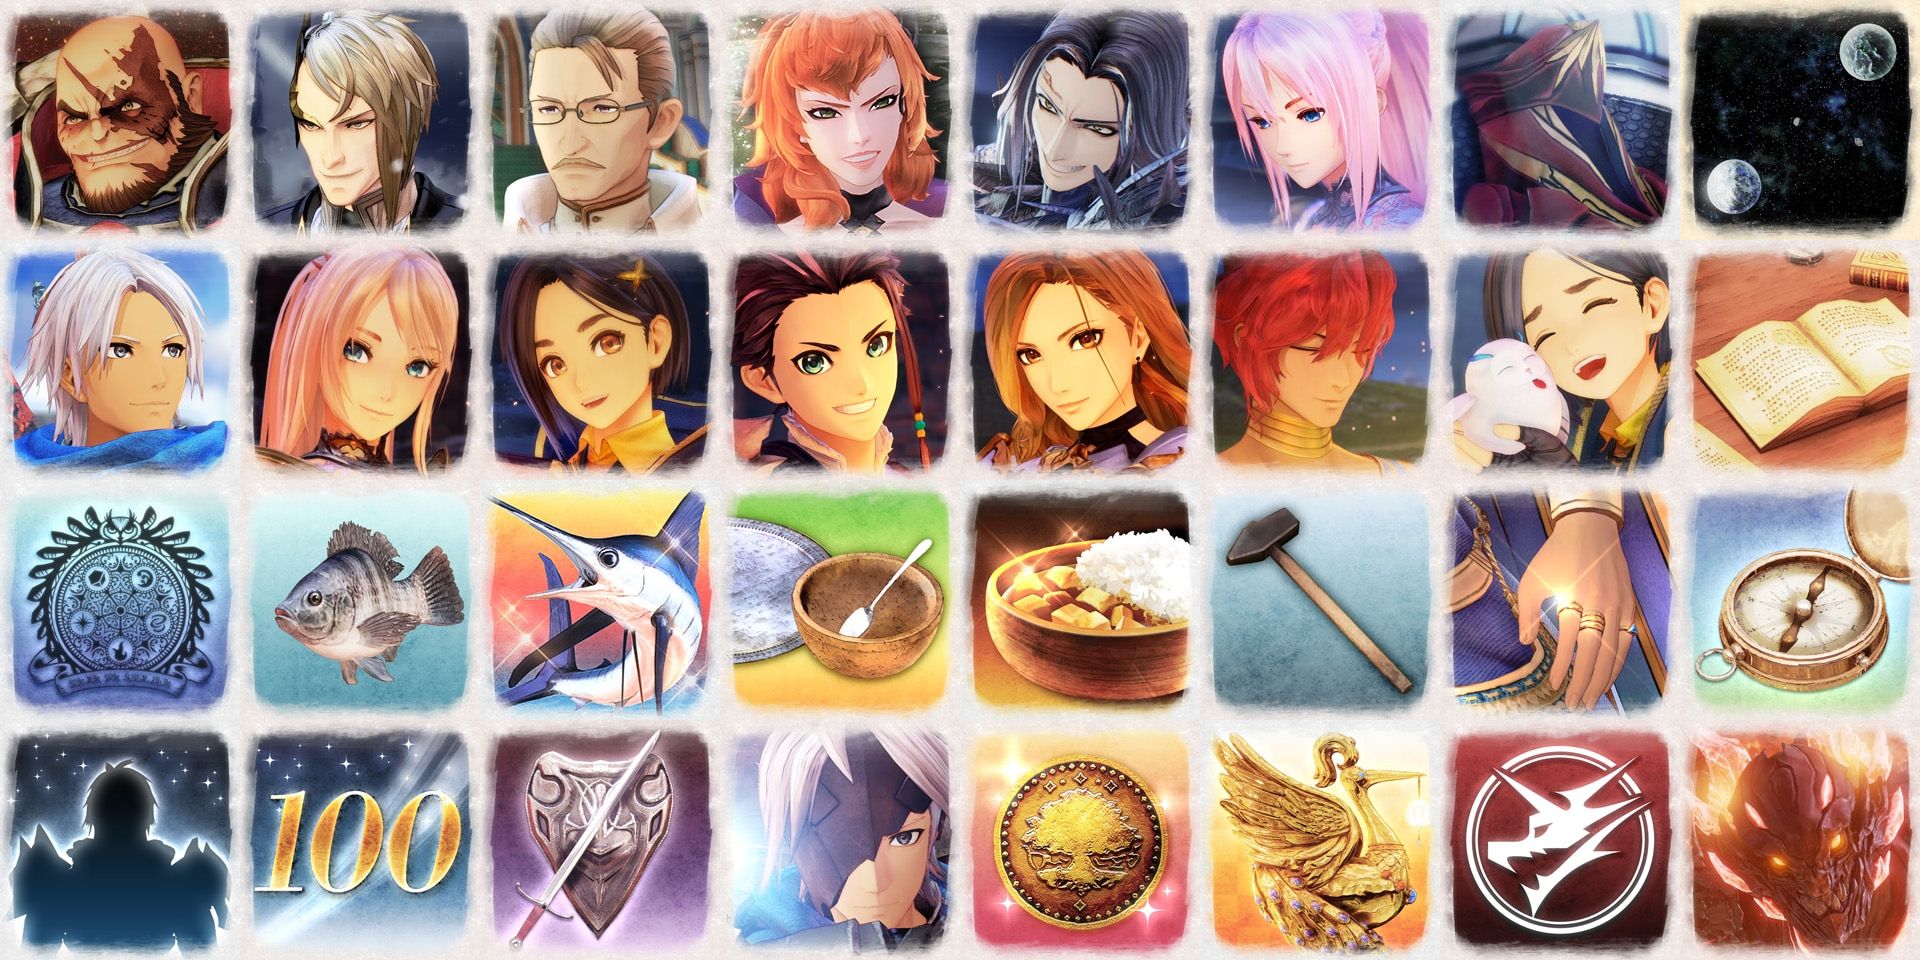 tales-of-arise-trophy-achievement-featured-image